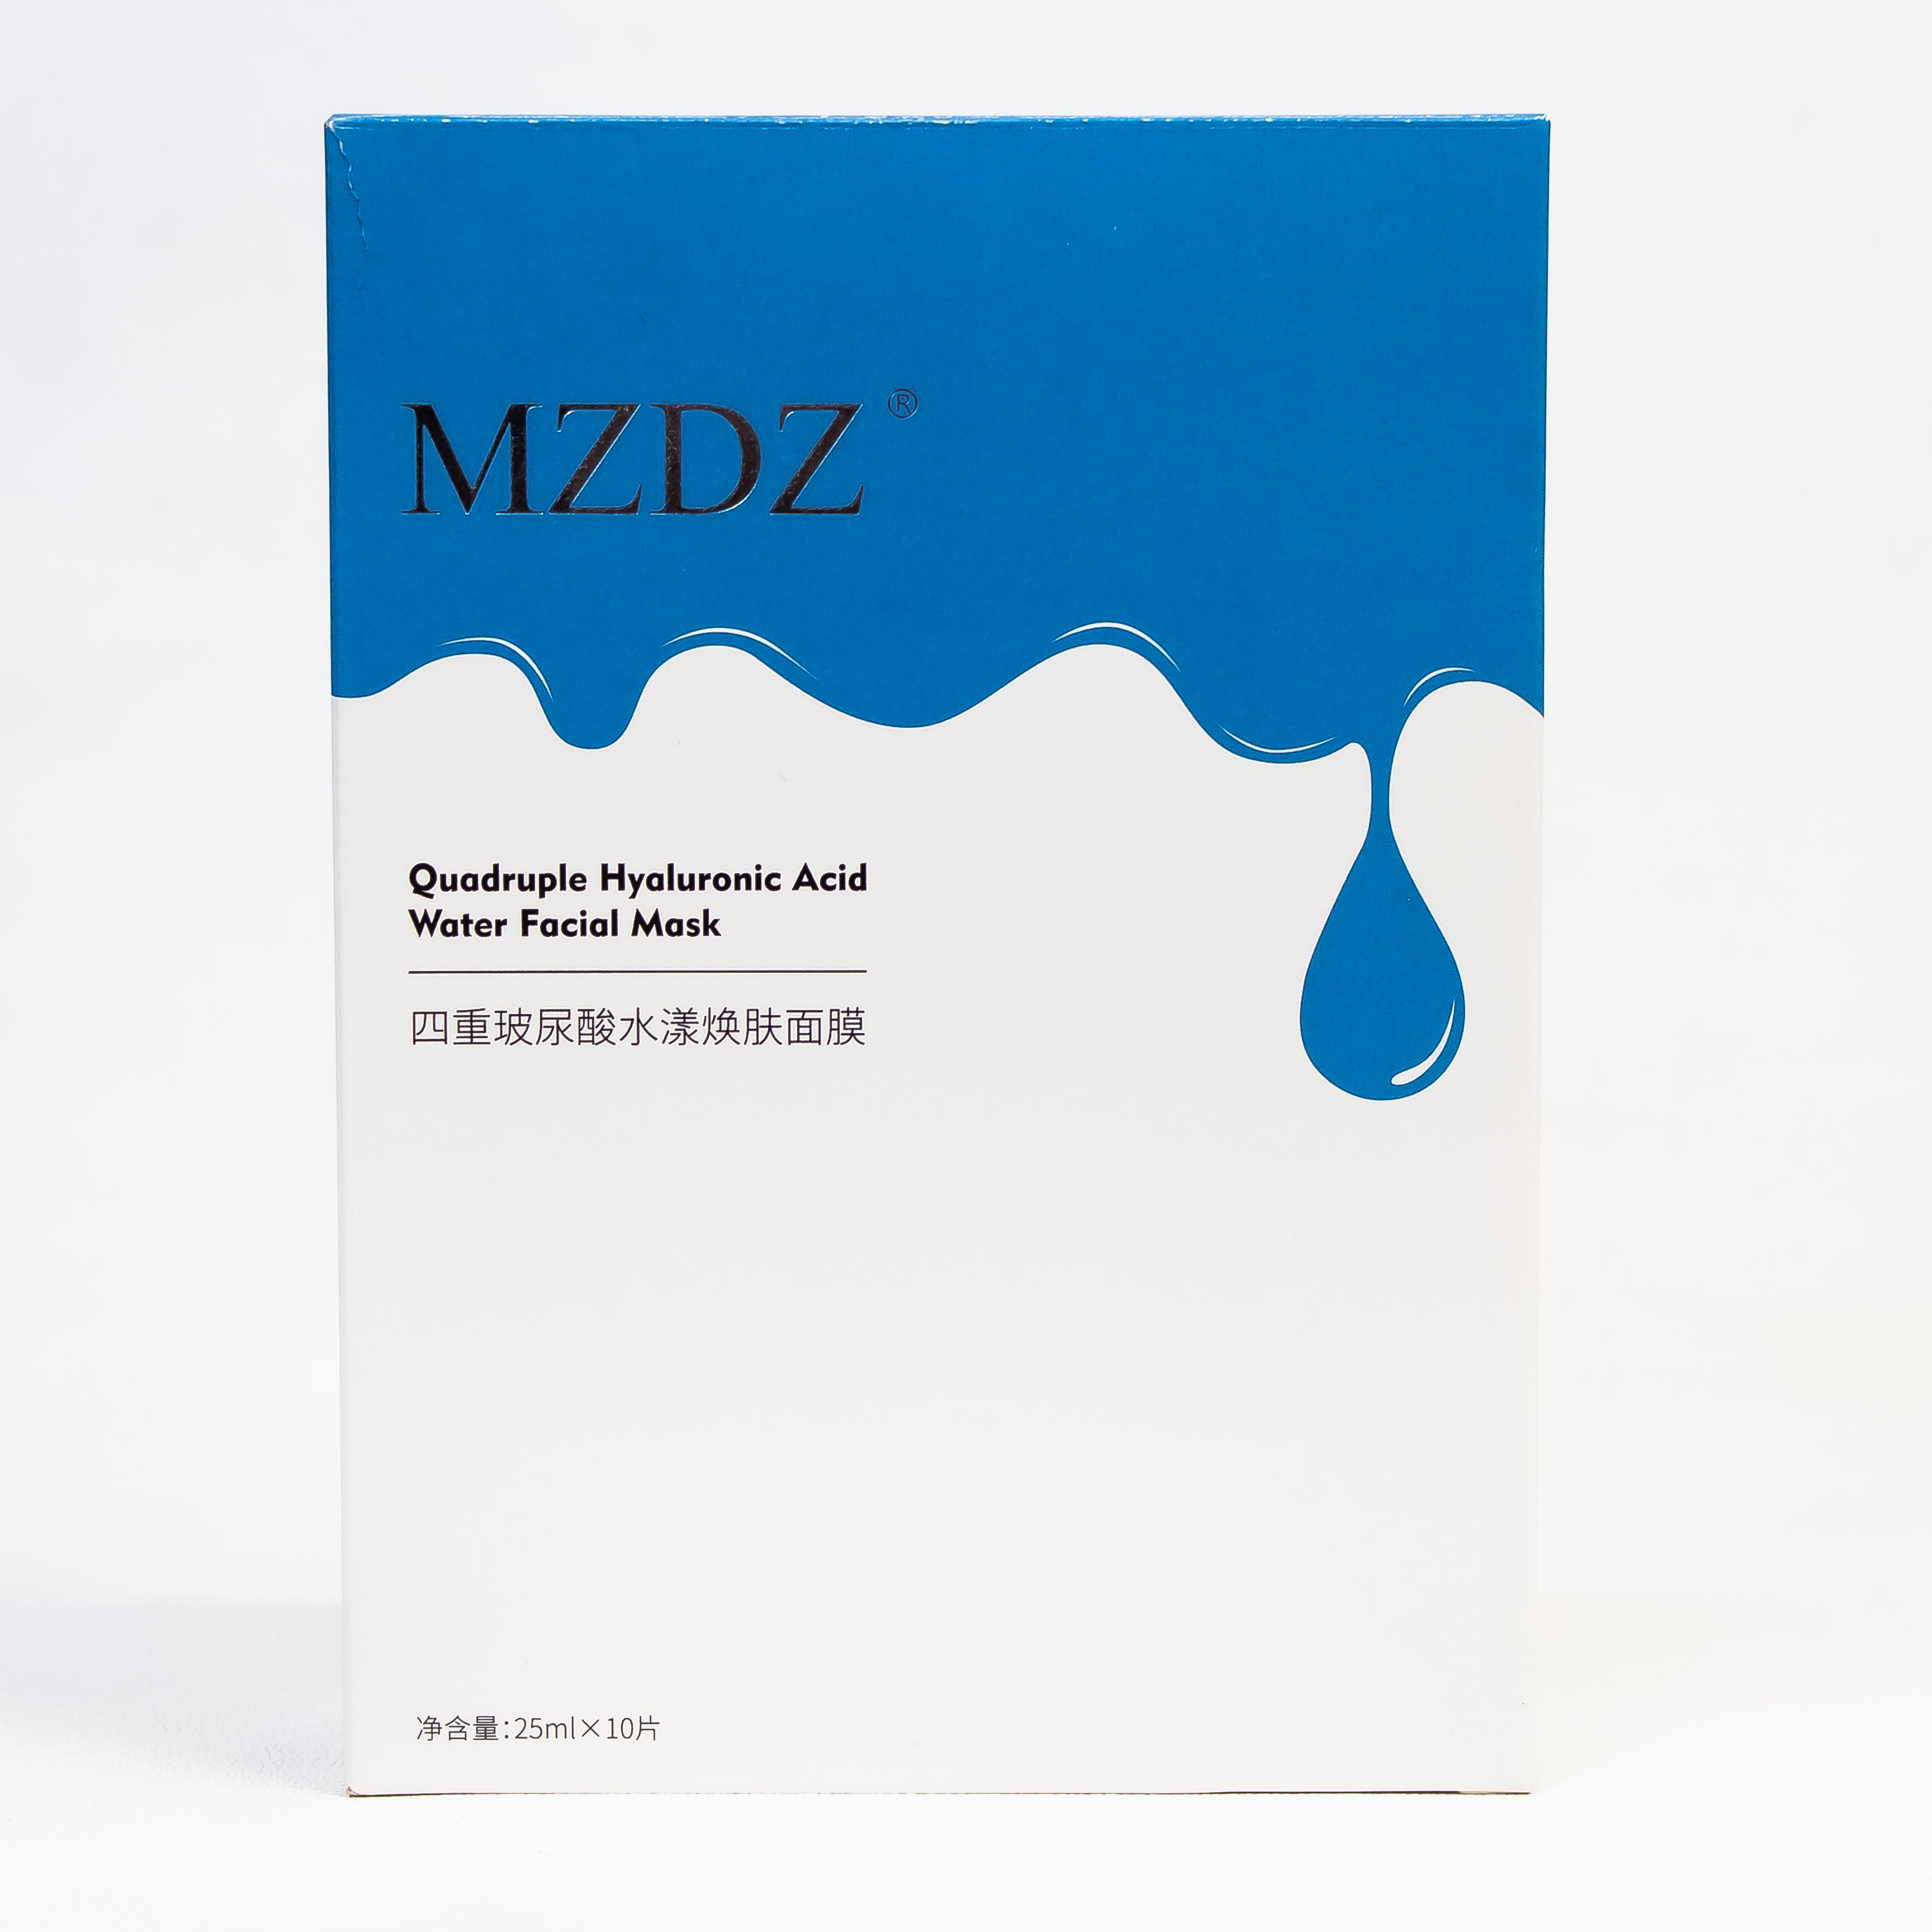 FACE MASK MZDZ HYALURONIC ACID WATER